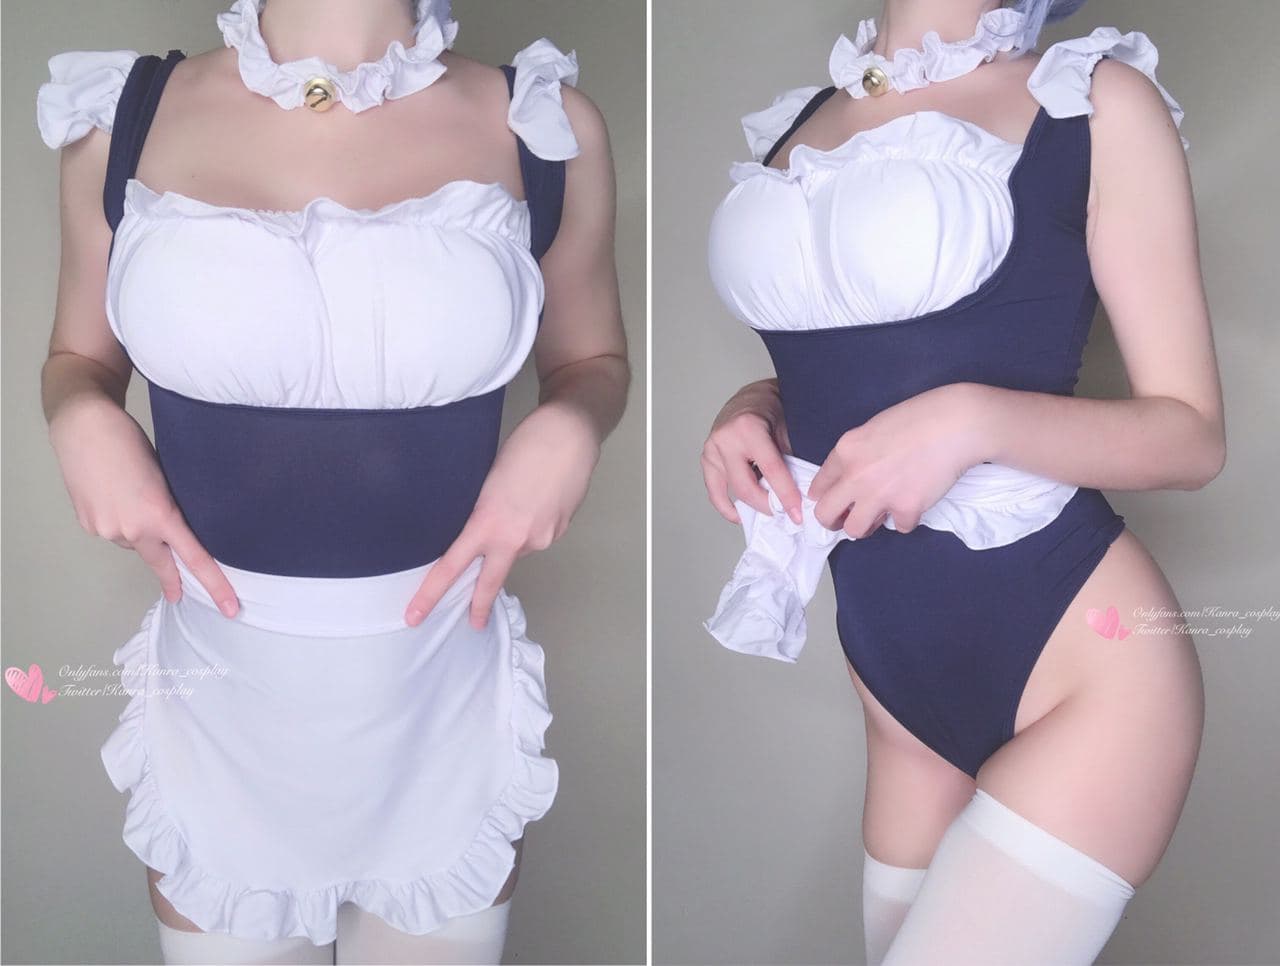 Maid Uniform And Thick Thighs Agree? By Kanra_cosplay